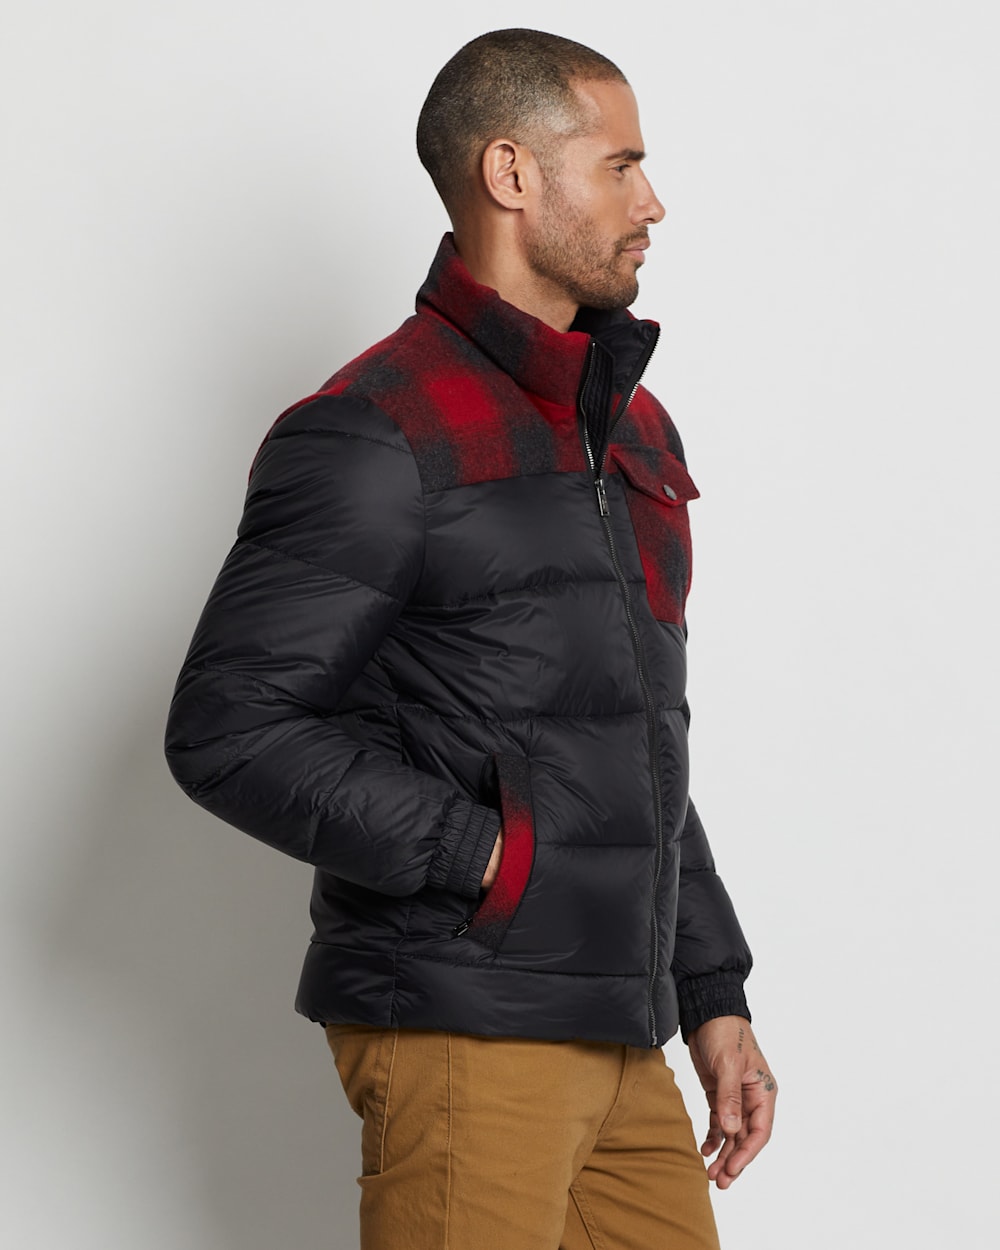 ALTERNATE VIEW OF MEN'S GRIZZLY PEAK PUFFER IN BLACK/RED OMBRE image number 5